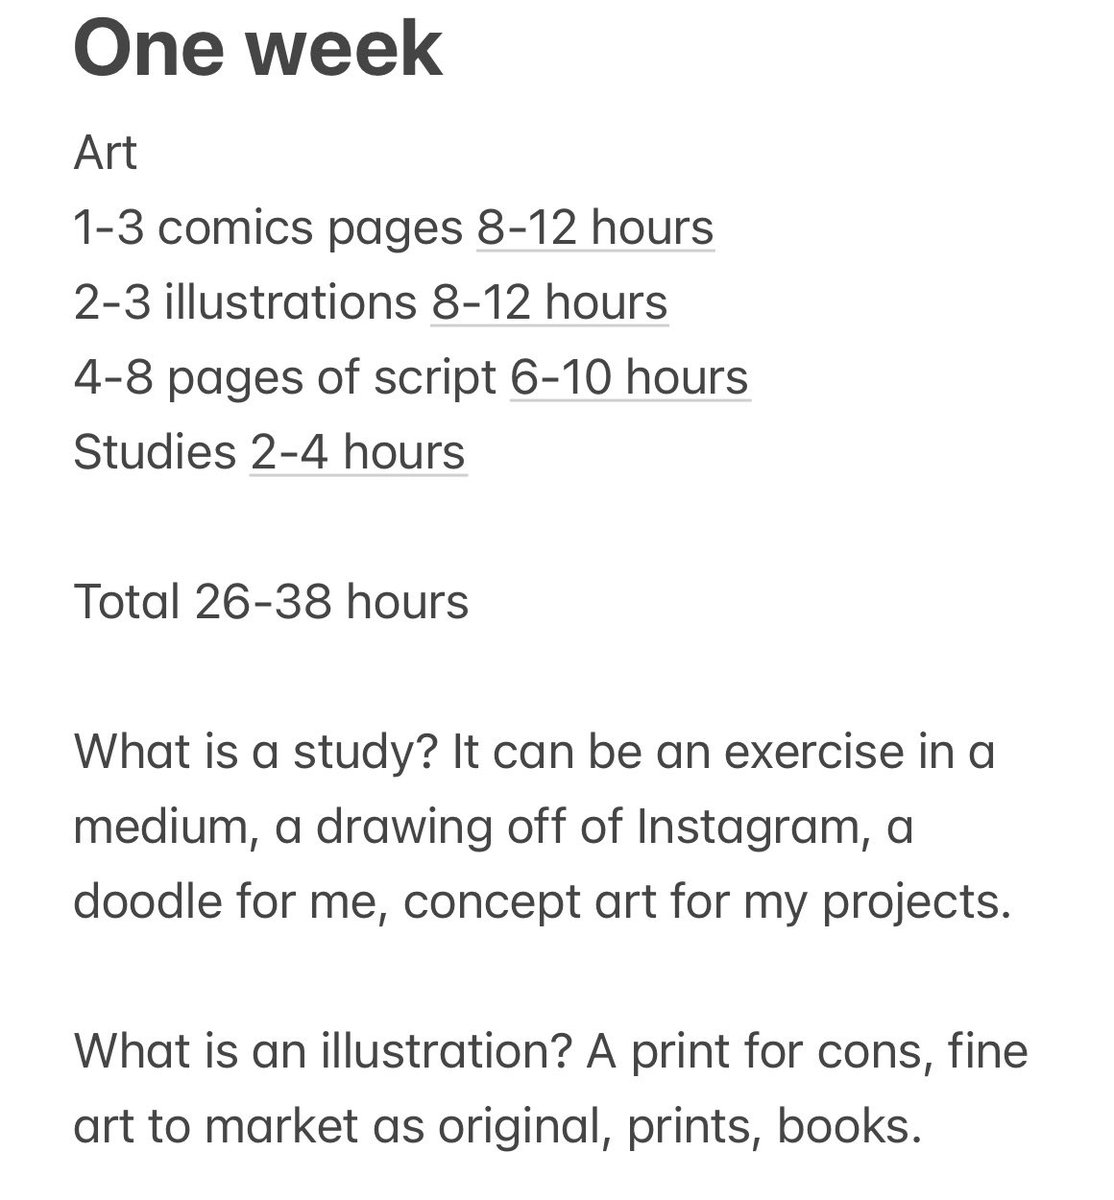 It's that time again where I rework an art schedule right after having a Comic Con. It's the reality of the time I have each week at least until the house is done.  #art #longterminvesting #goals #smartgoals #longtermplanning #makingcomics #timemanagement #artgoals